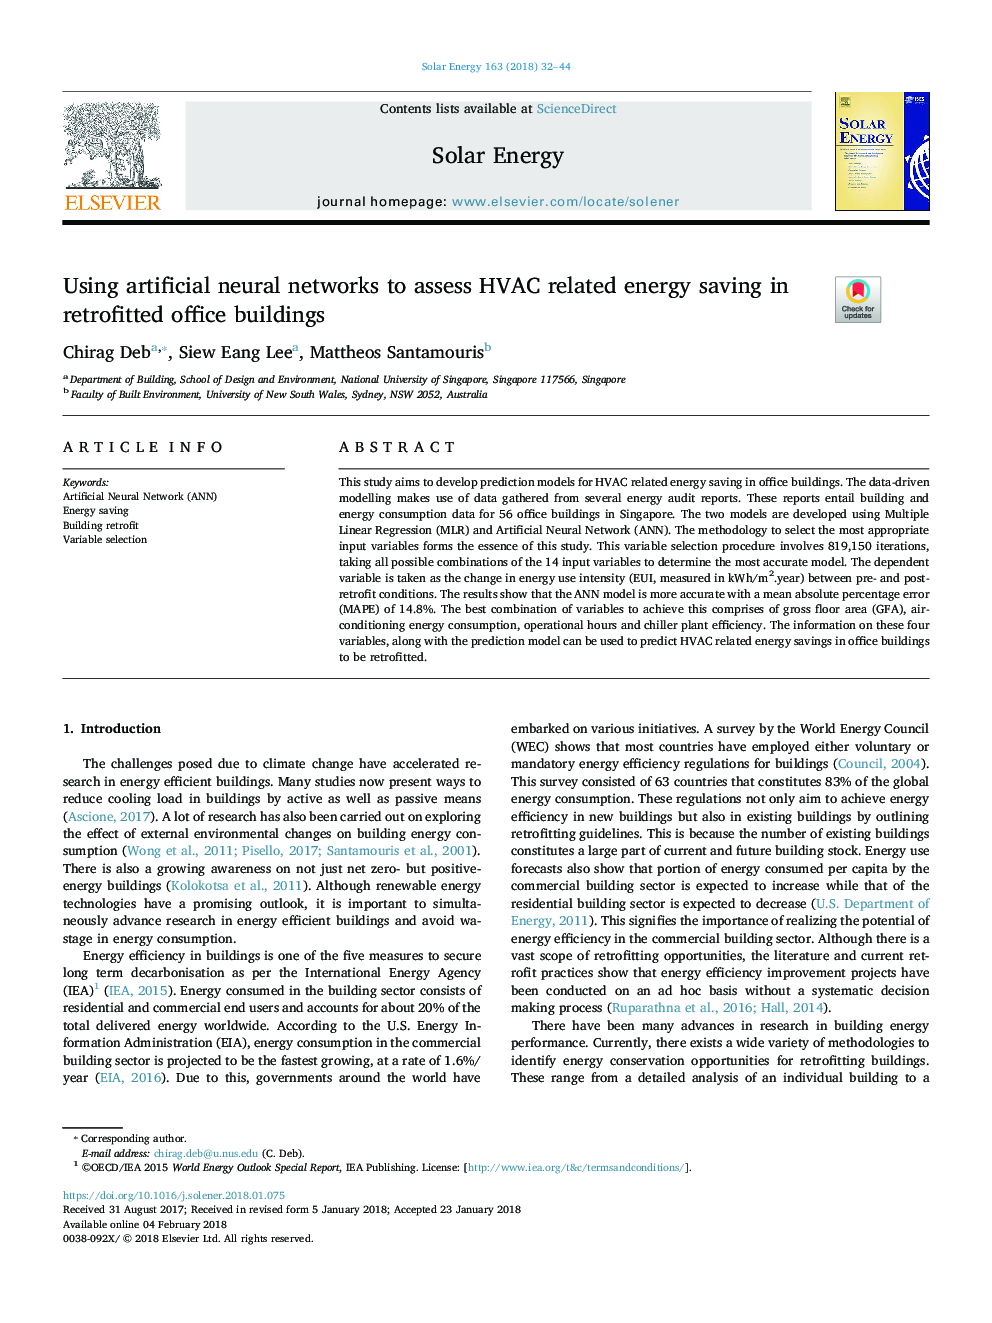 Using artificial neural networks to assess HVAC related energy saving in retrofitted office buildings